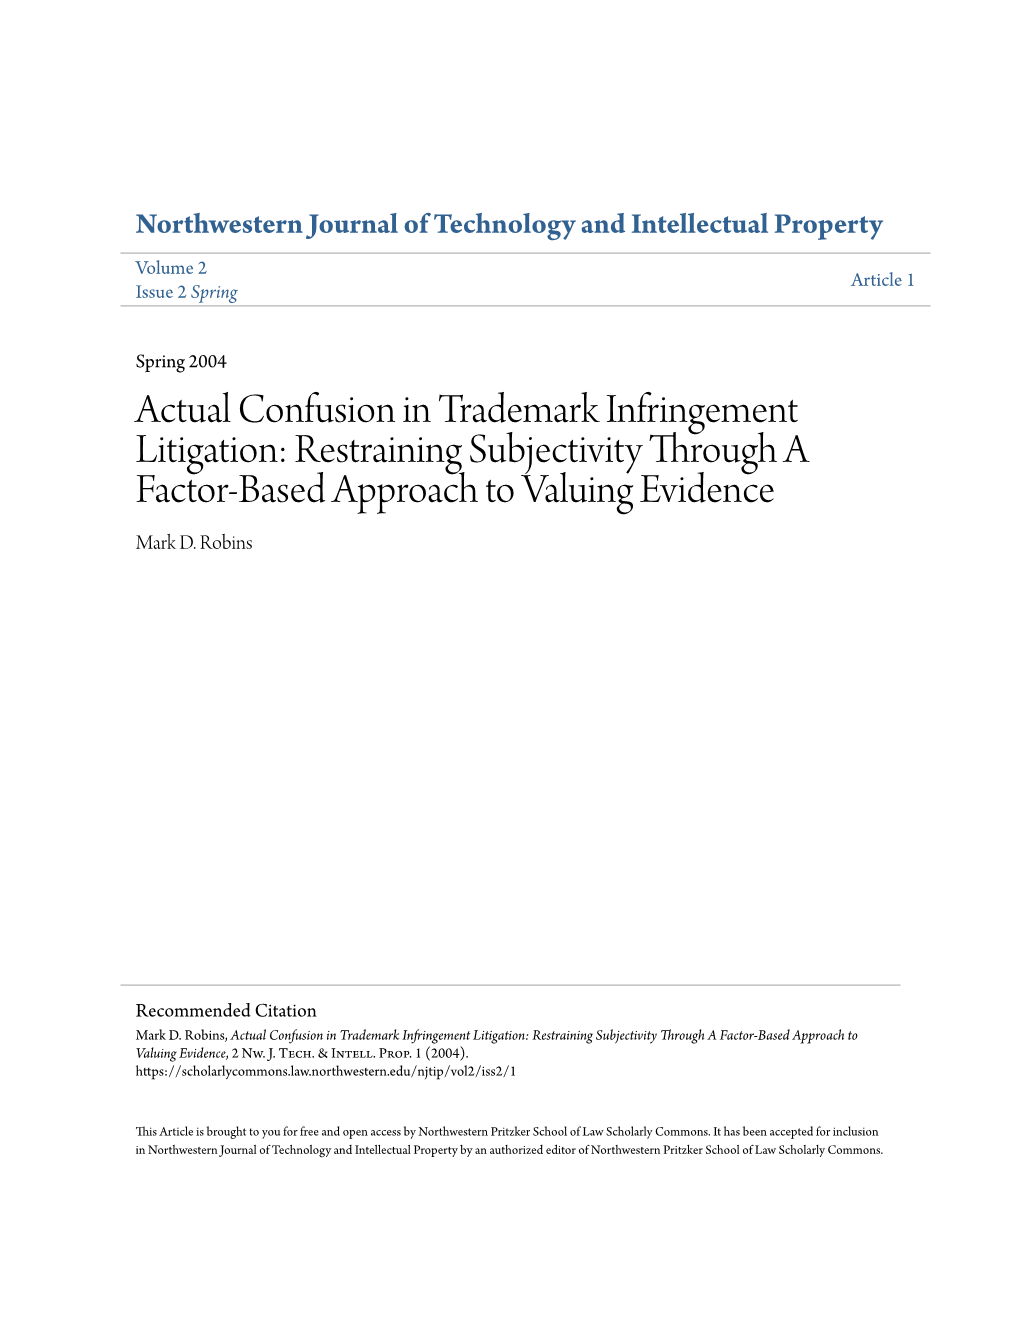 Actual Confusion in Trademark Infringement Litigation: Restraining Subjectivity Through a Factor-Based Approach to Valuing Evidence Mark D